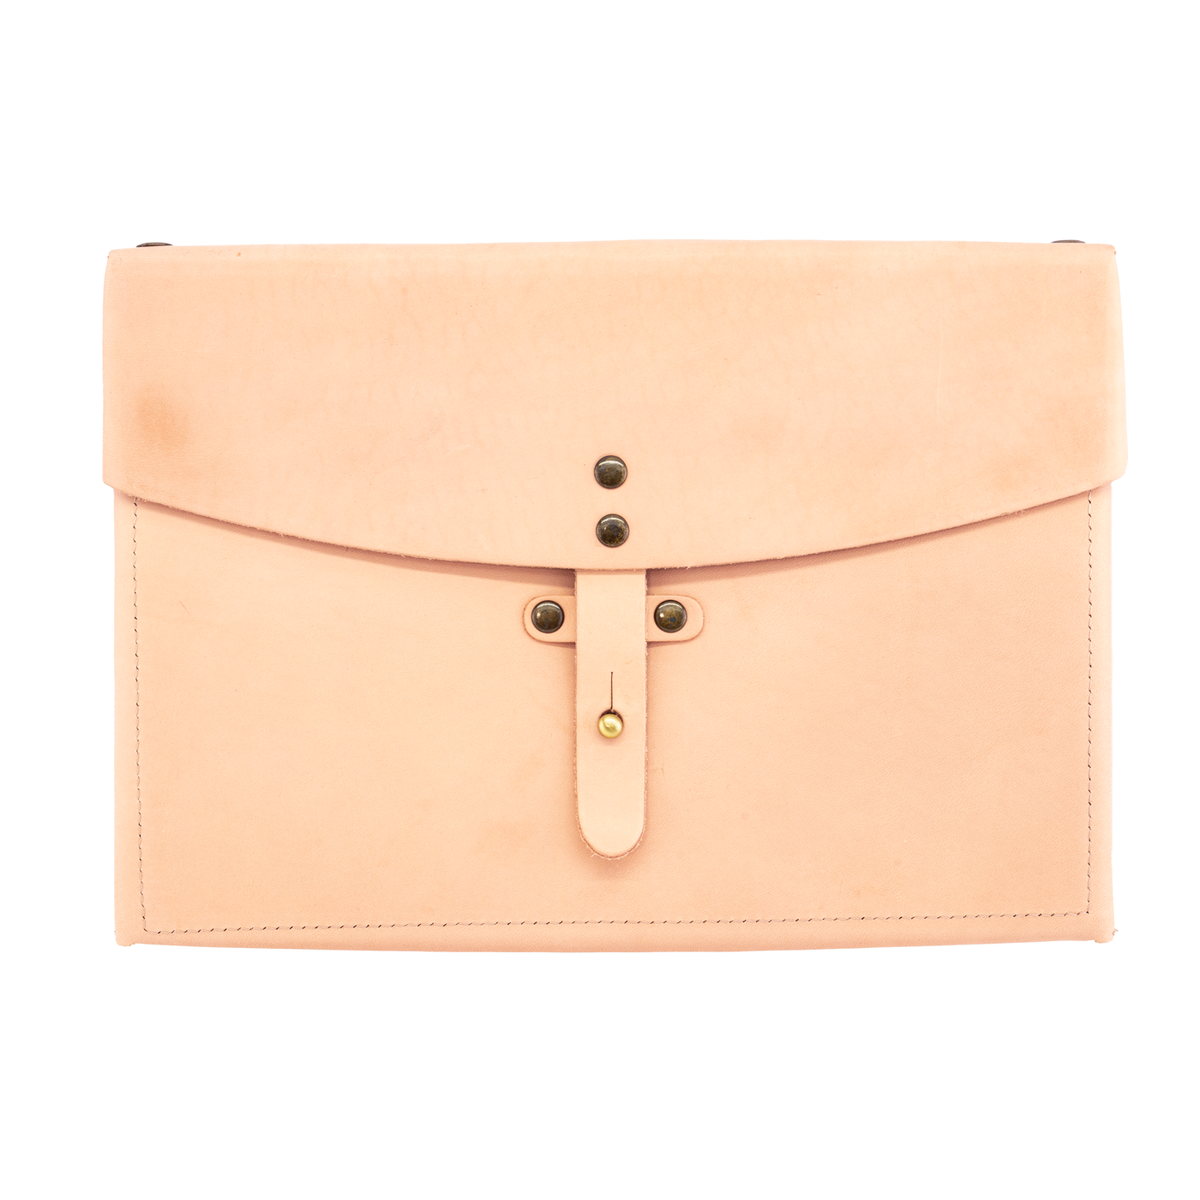 Galen Leather Co. Writer's Medic Bag- Undyed Leather